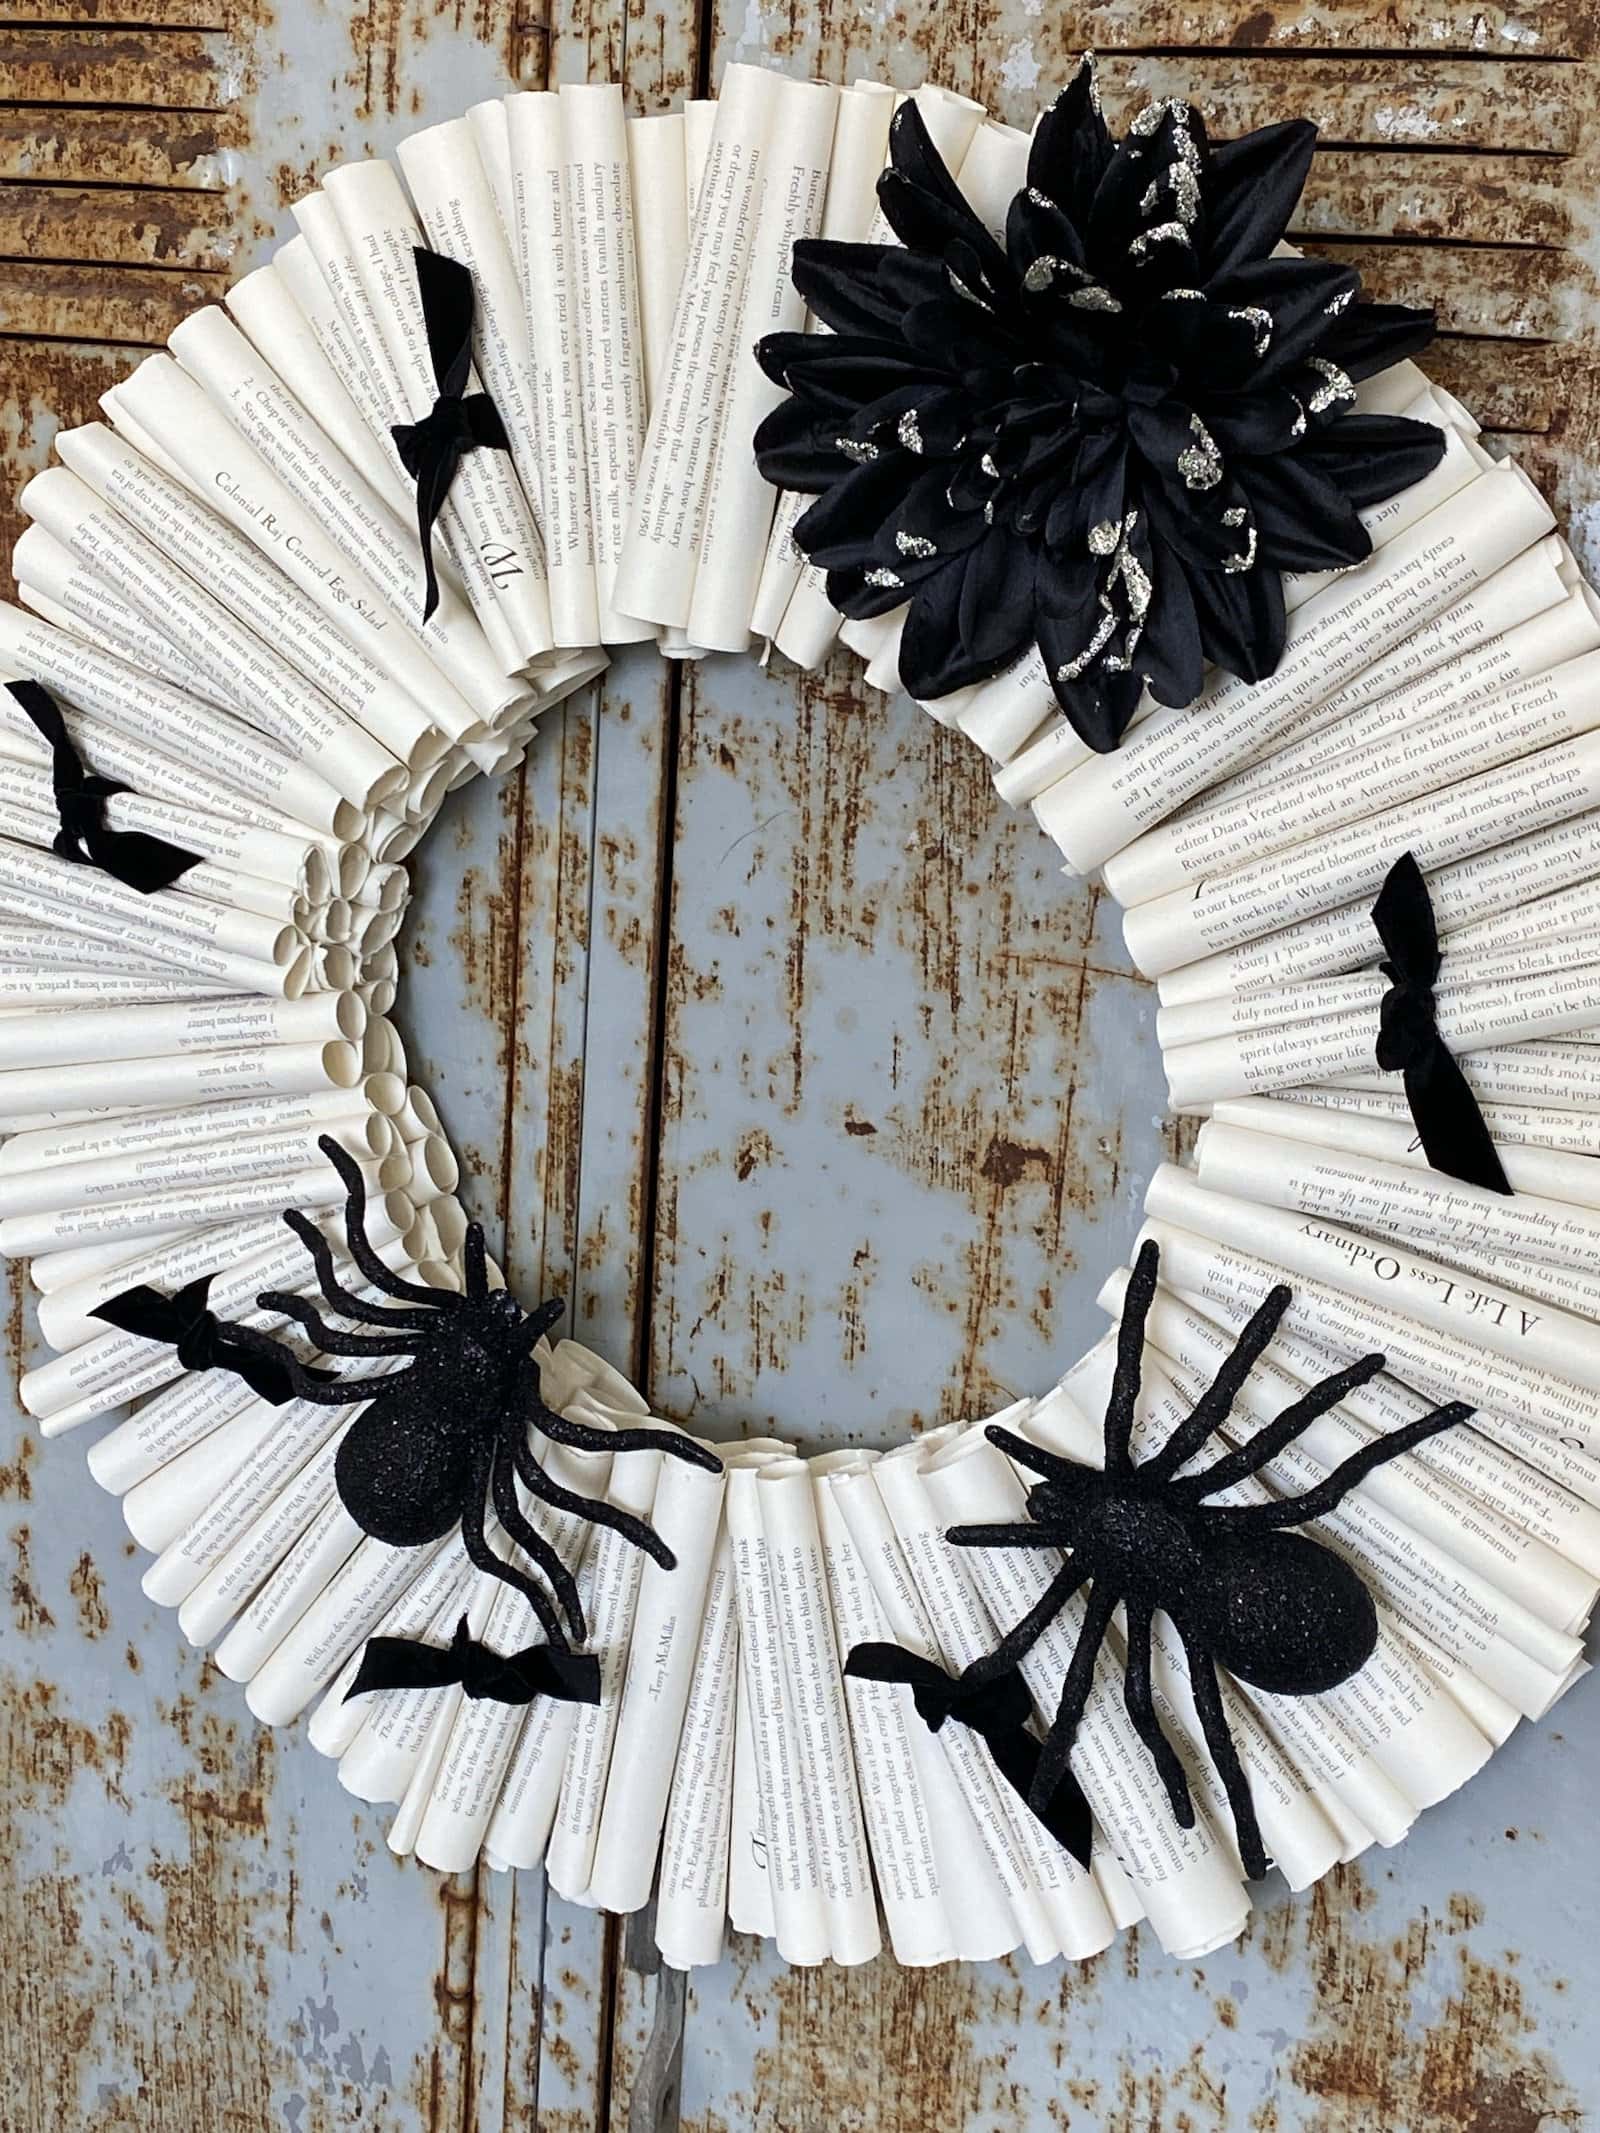 DIY Halloween Book Page Wreath with spiders and a black flower